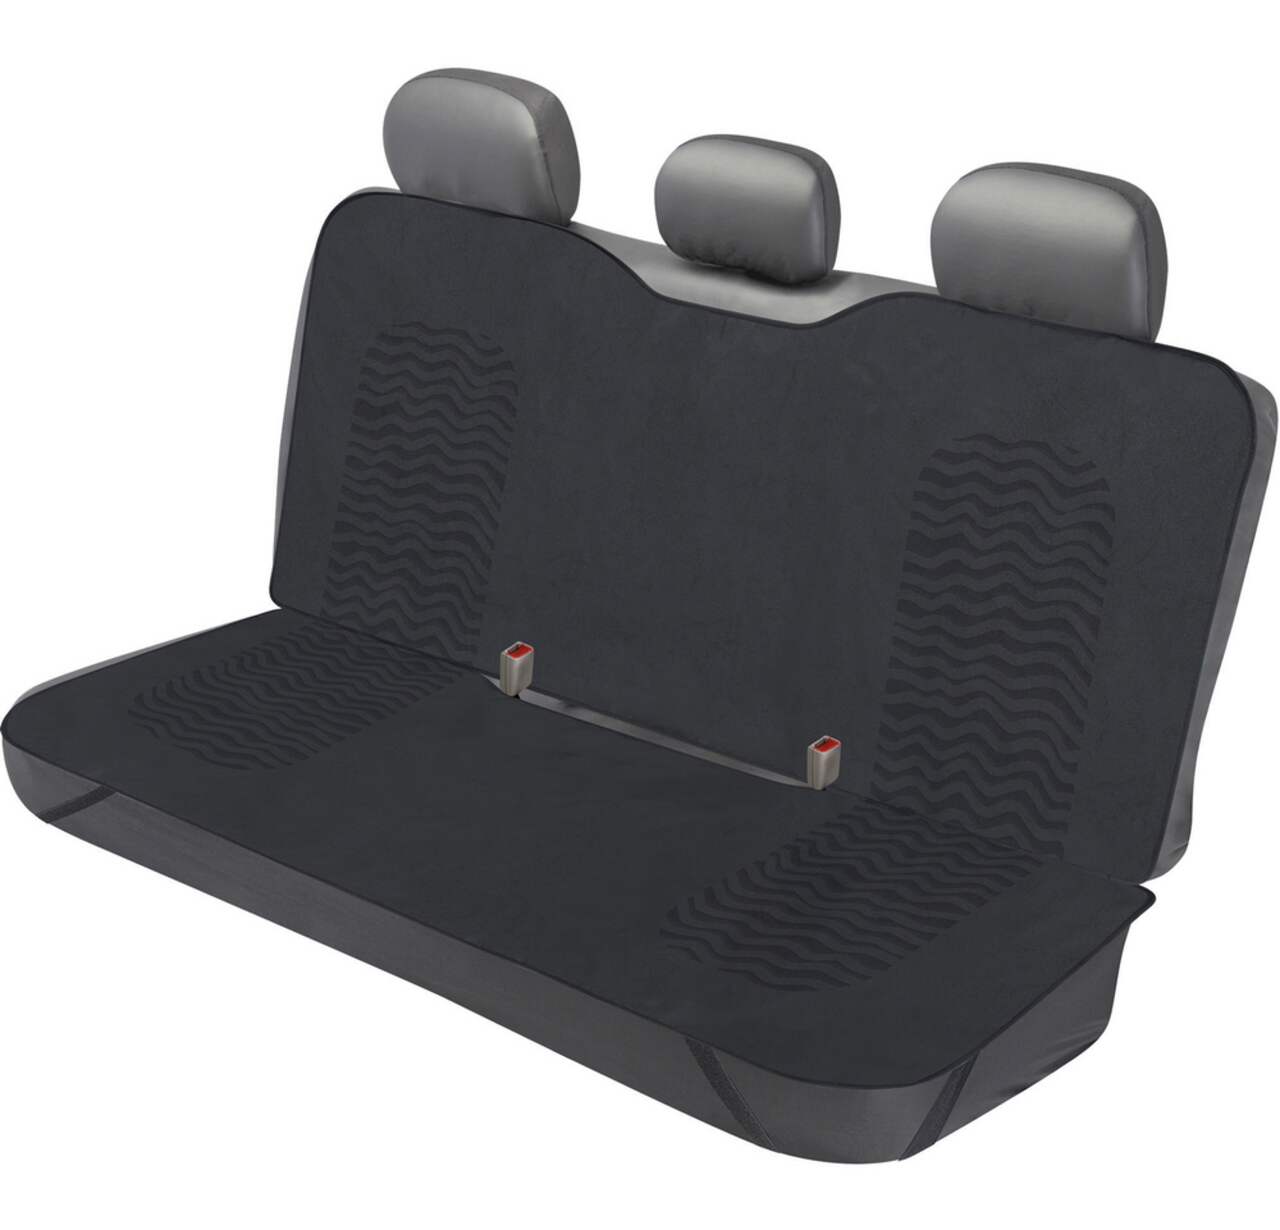 https://media-www.canadiantire.ca/product/automotive/car-care-accessories/auto-comfort/0323912/type-s-waterproof-rear-seat-protector-black-1-pk-521a3d42-5cbc-47ed-b8bf-8418bcd4d416.png?imdensity=1&imwidth=640&impolicy=mZoom